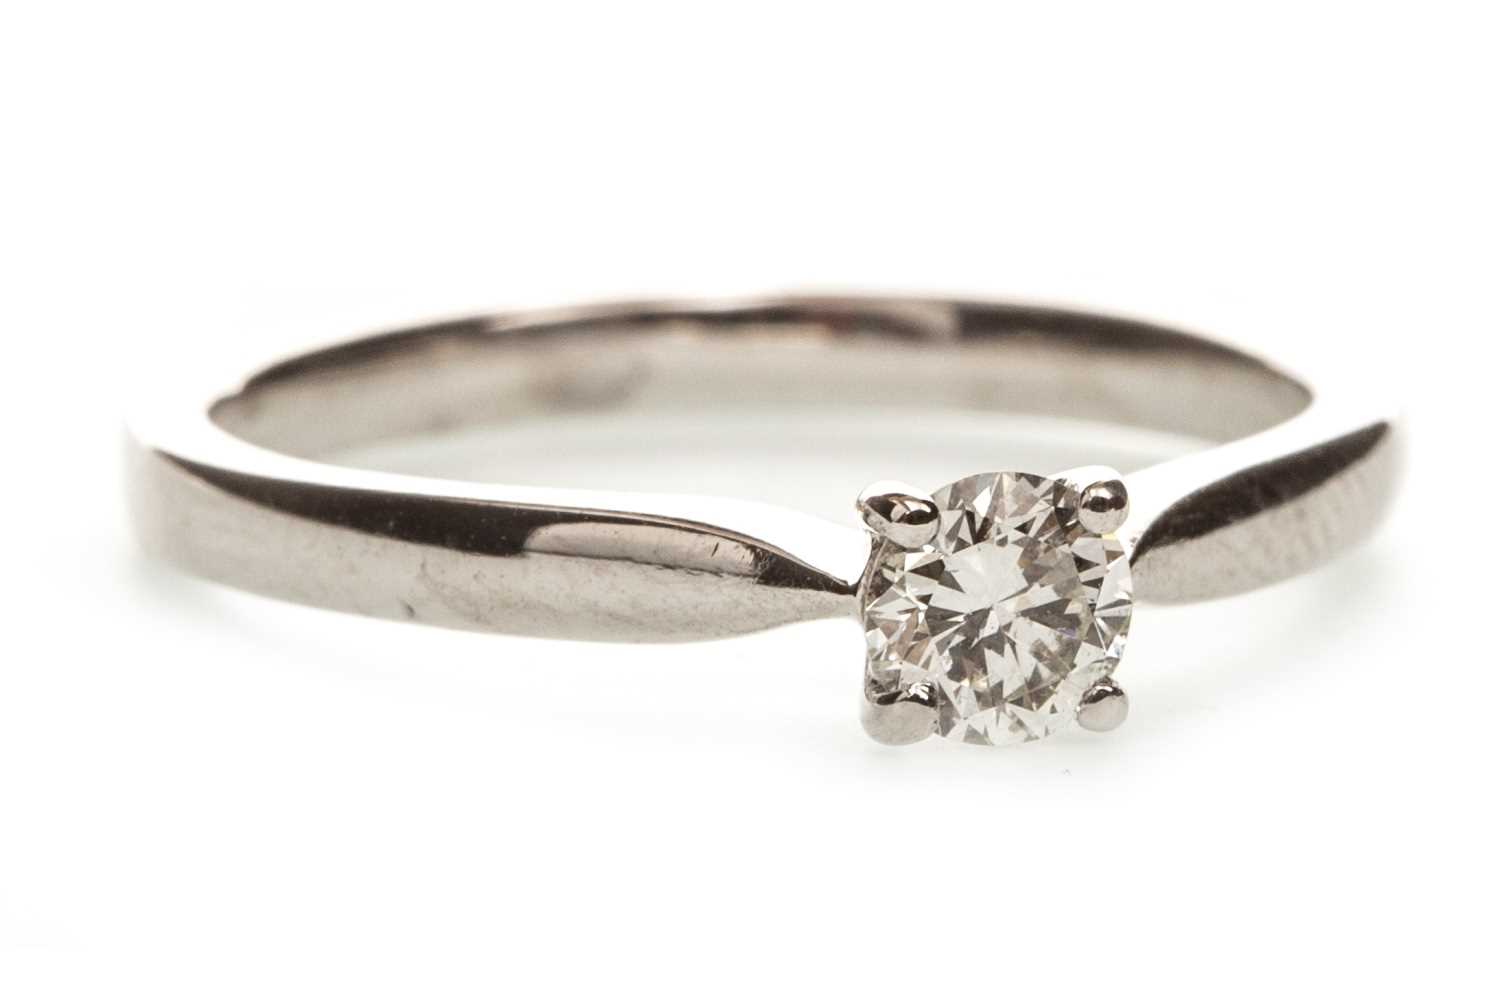 Lot 201 - A DIAMOND SOLITAIRE RING